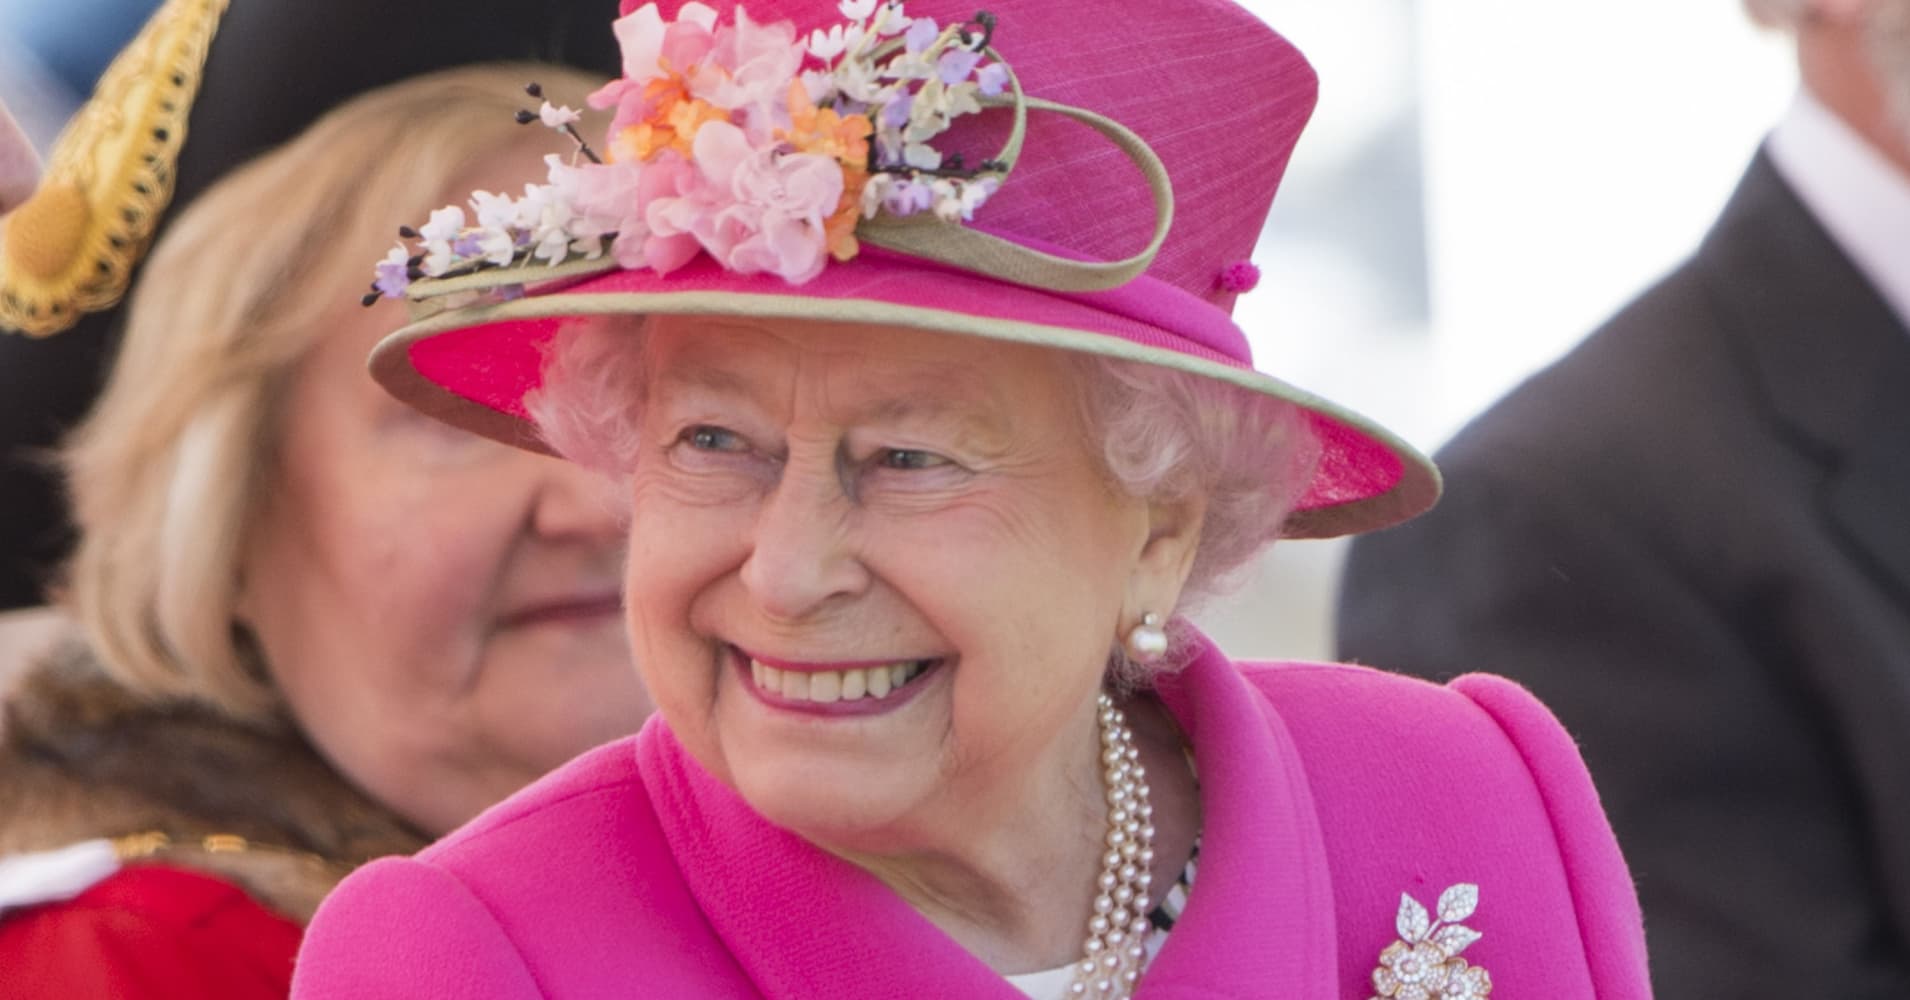 Queen Elizabeth II's 90th birthday: Why the Royal Family matters